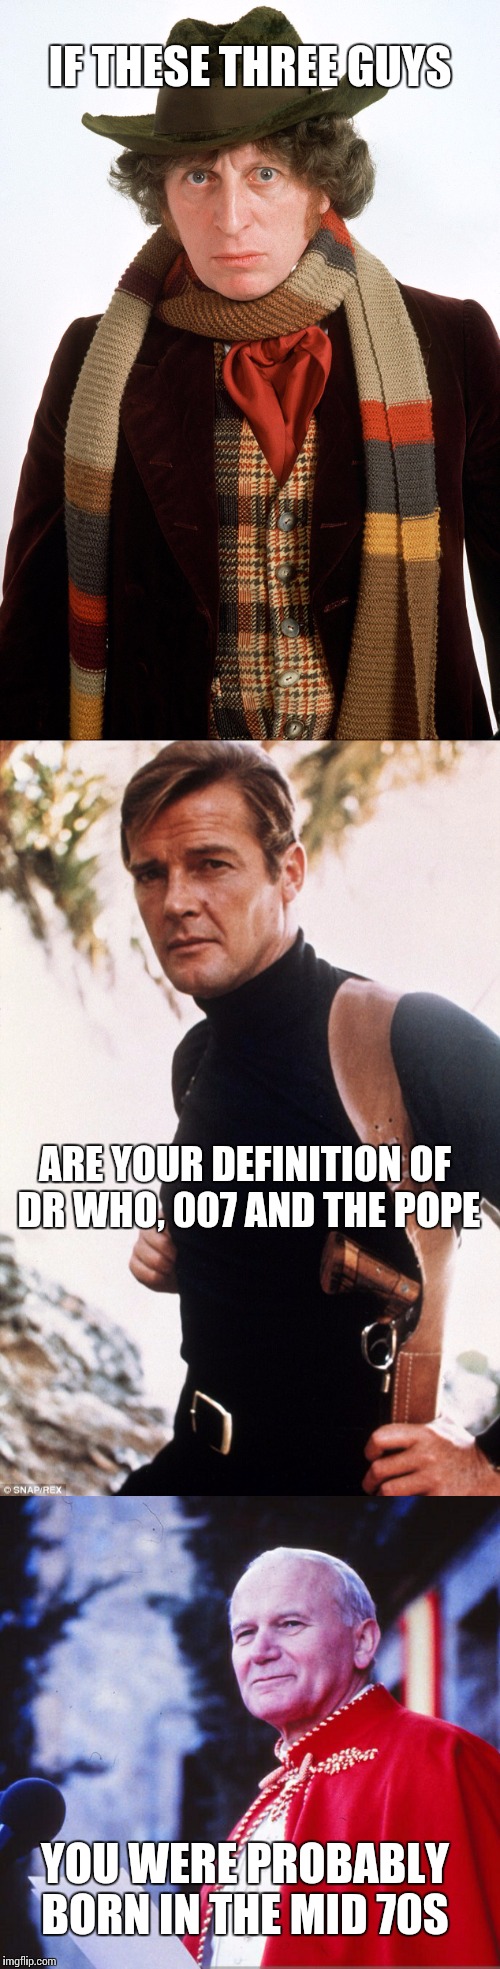 Definitions of Iconic Figures | IF THESE THREE GUYS; ARE YOUR DEFINITION OF DR WHO, 007 AND THE POPE; YOU WERE PROBABLY BORN IN THE MID 70S | image tagged in pope,dr who,james bond | made w/ Imgflip meme maker